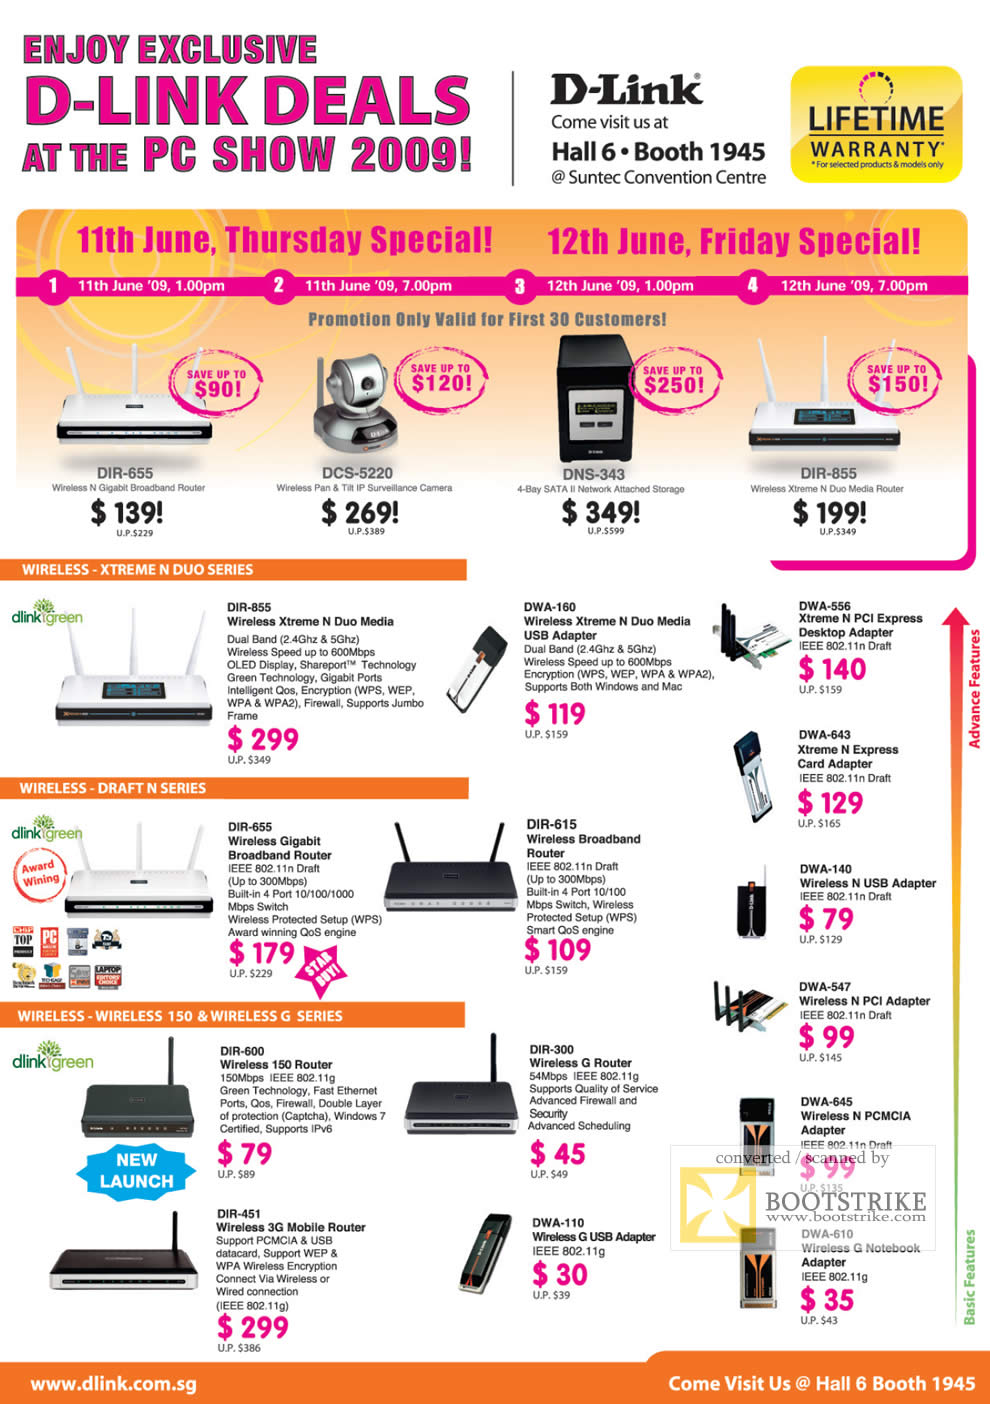 PC Show 2009 price list image brochure of D-Link Wireless Xtreme Draft N Duo 150 Router Camera NAS